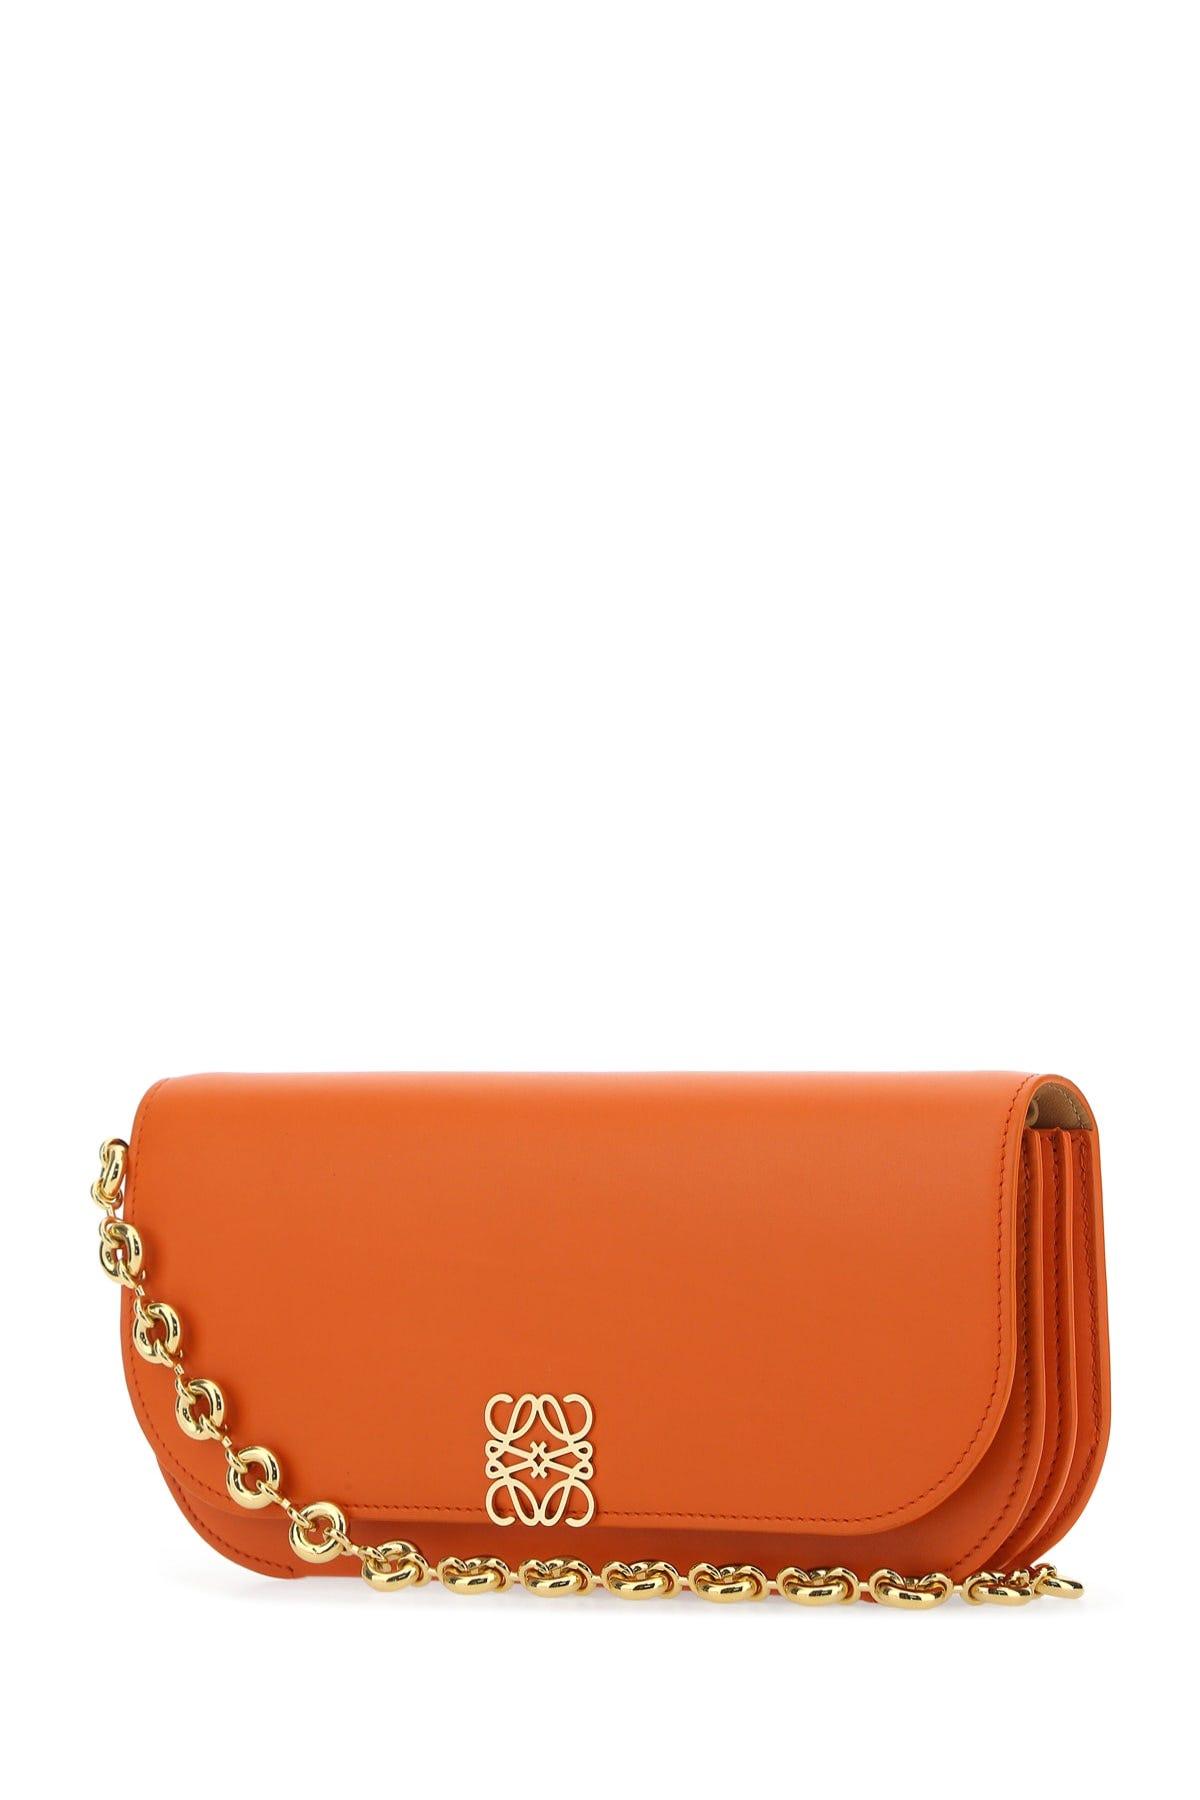 Loewe Luxury Goya Long Chain Clutch In Mohair And Calfskin For in Red